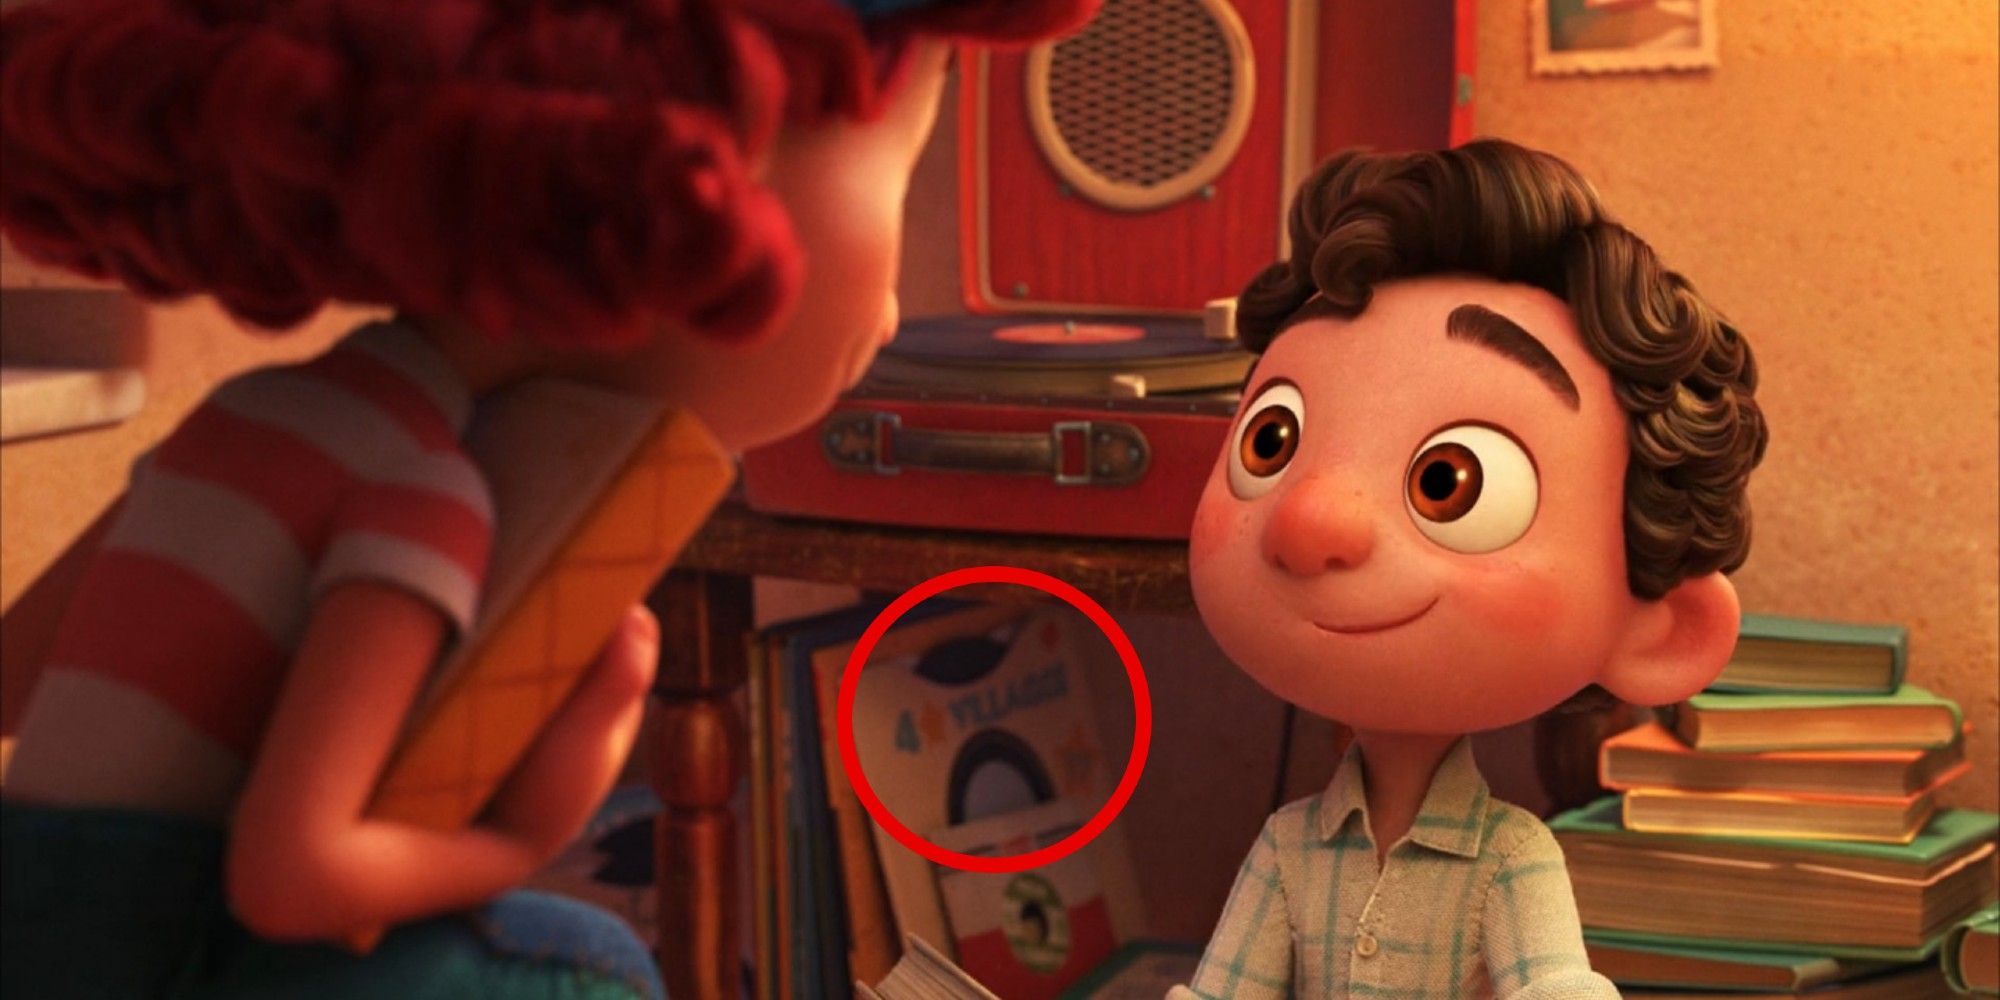 A record in Luca teases Pixar's Turning Red